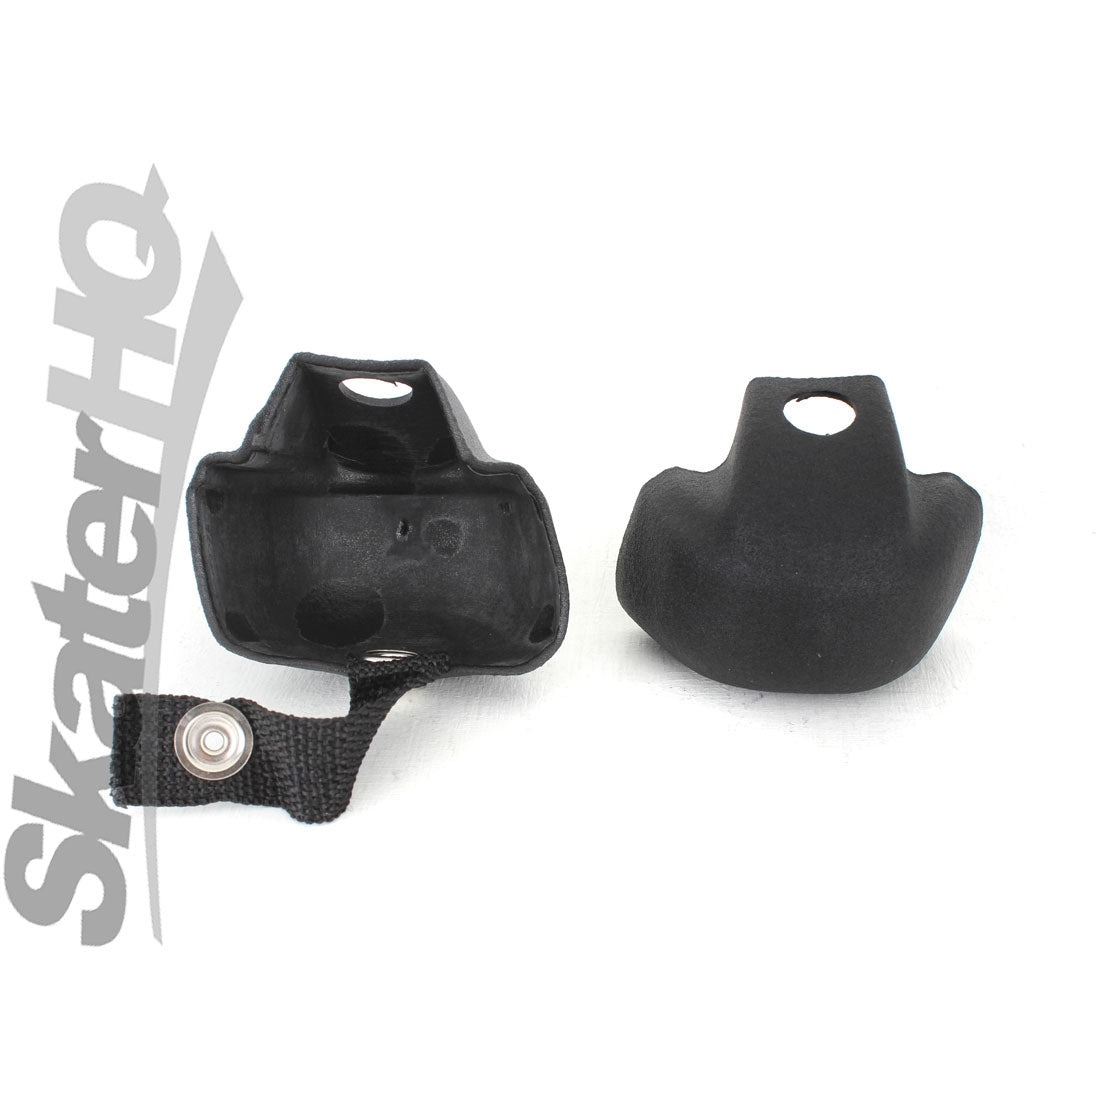 Sure-Grip Jammer Toe Caps Pair - Black Roller Skate Hardware and Parts